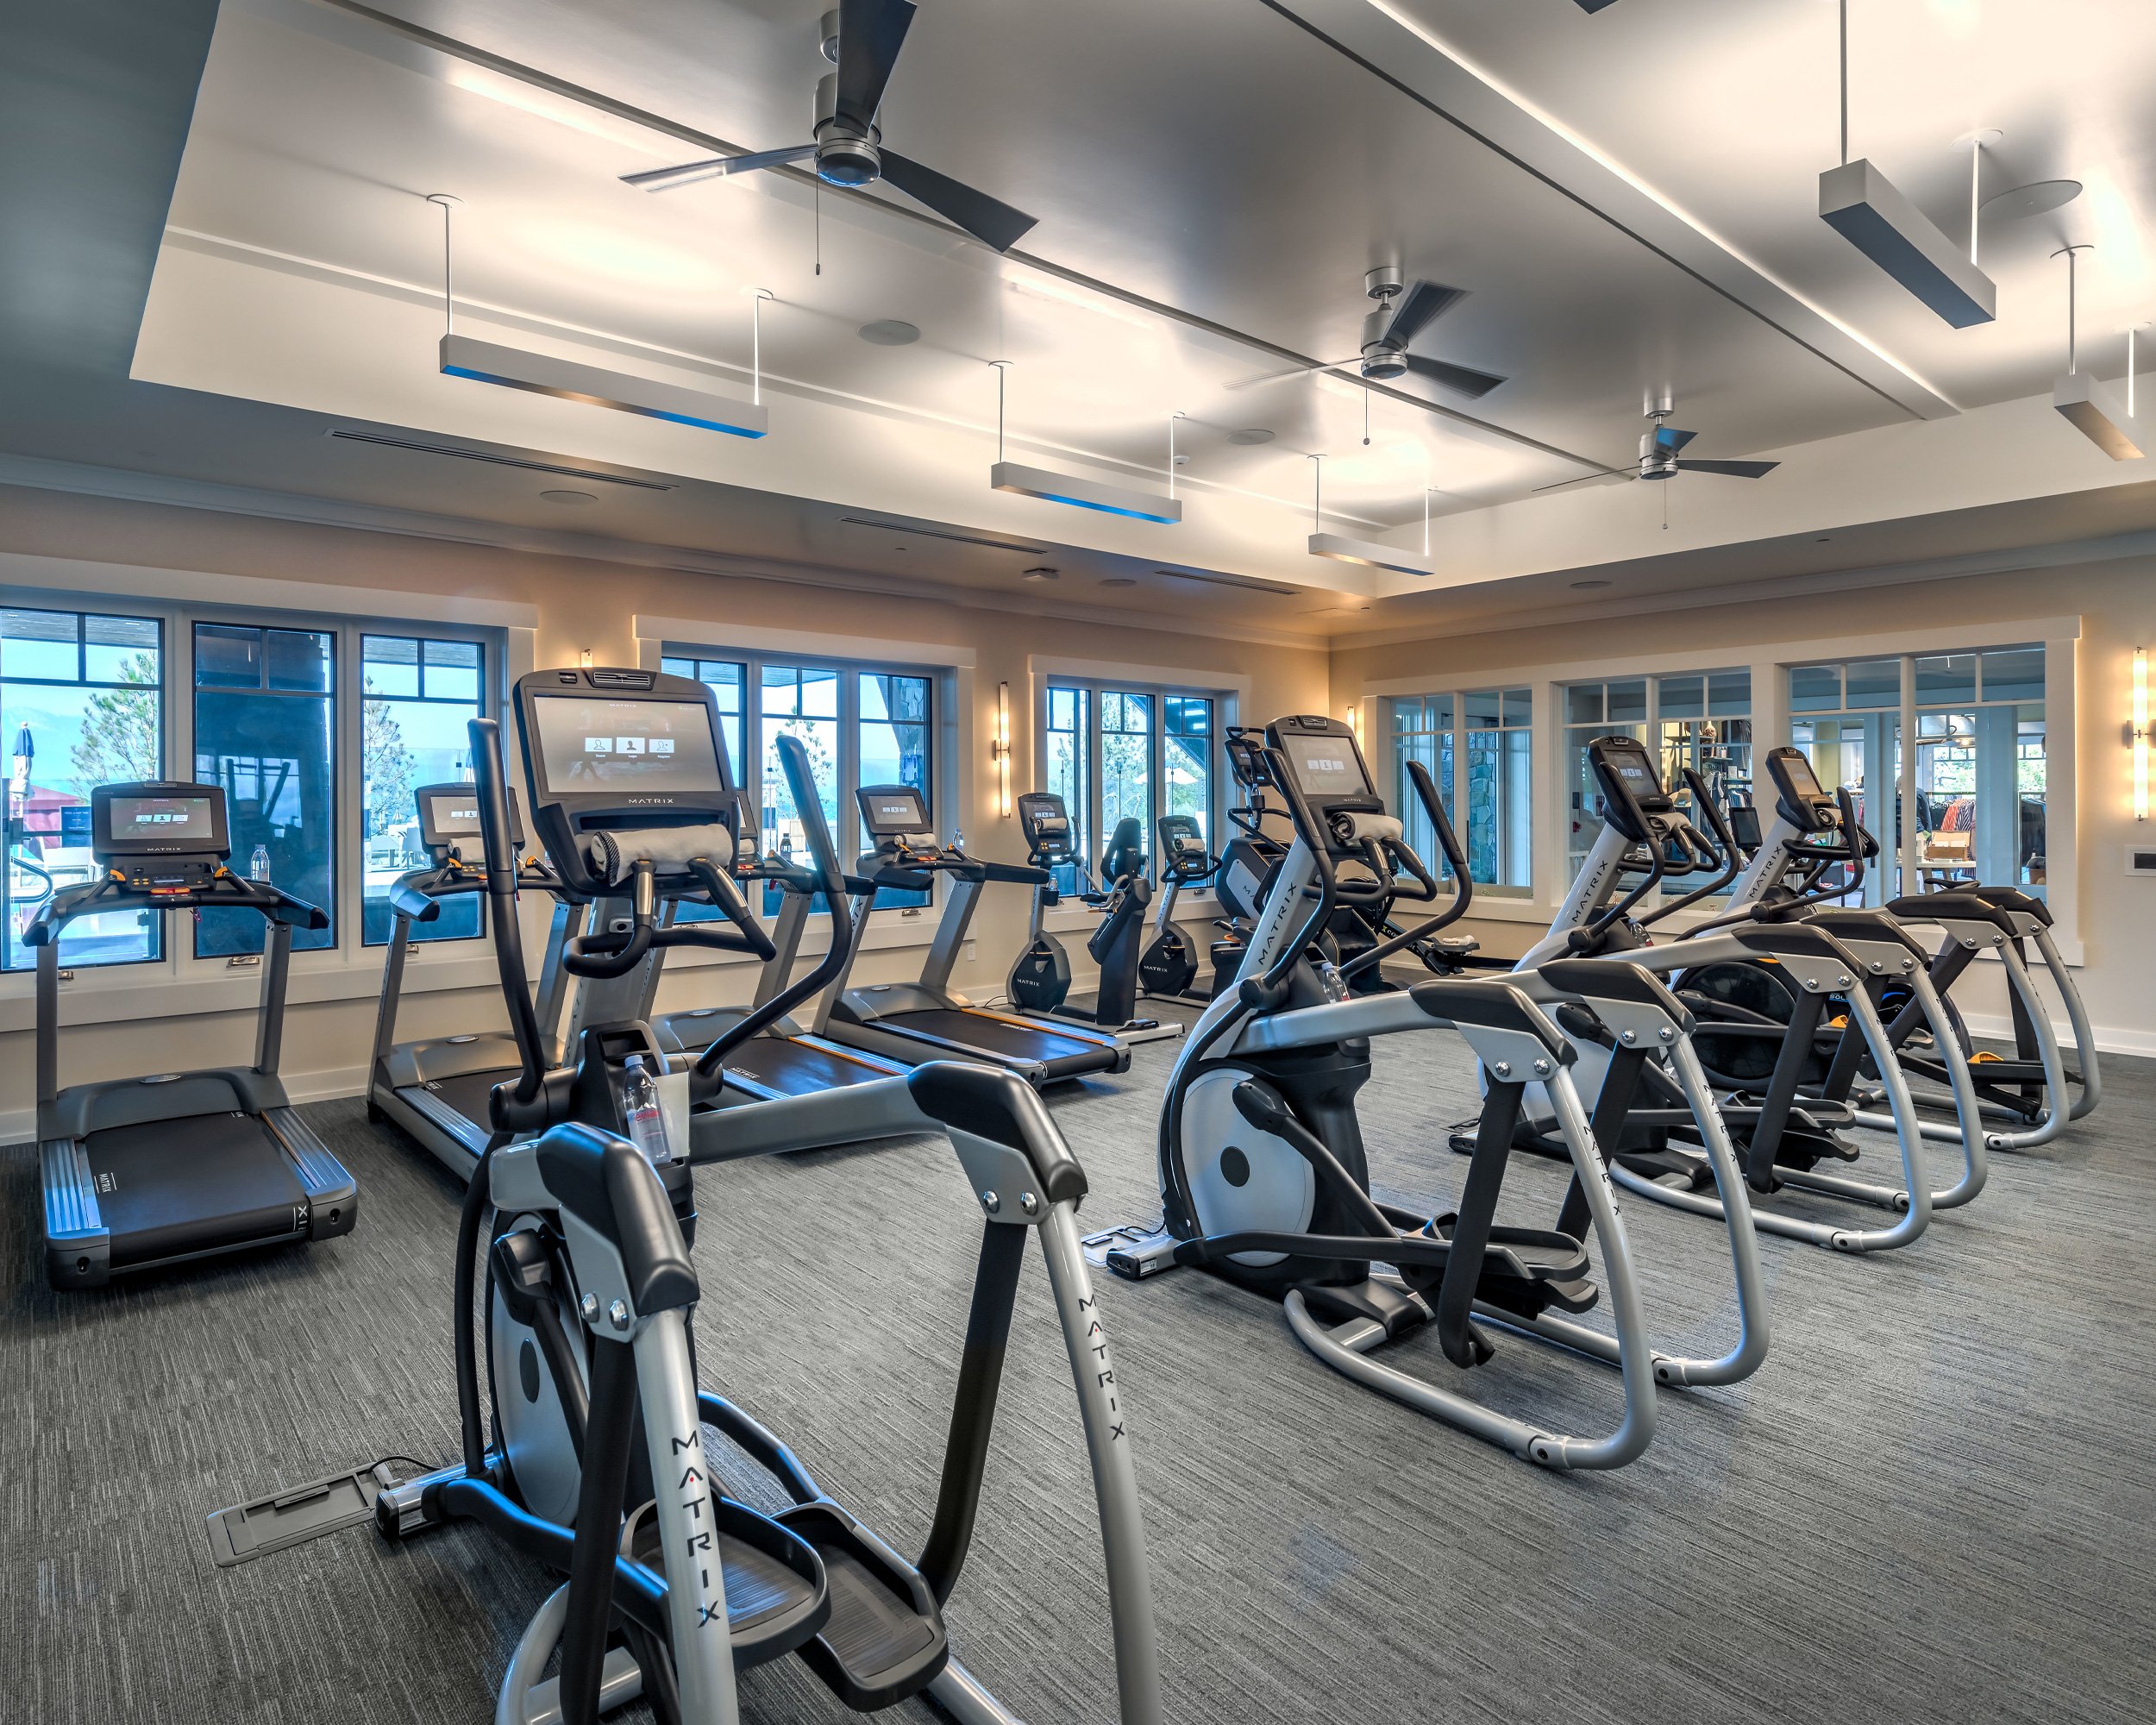 Modern fitness center featuring a variety of workout machines and ample space for exercise.